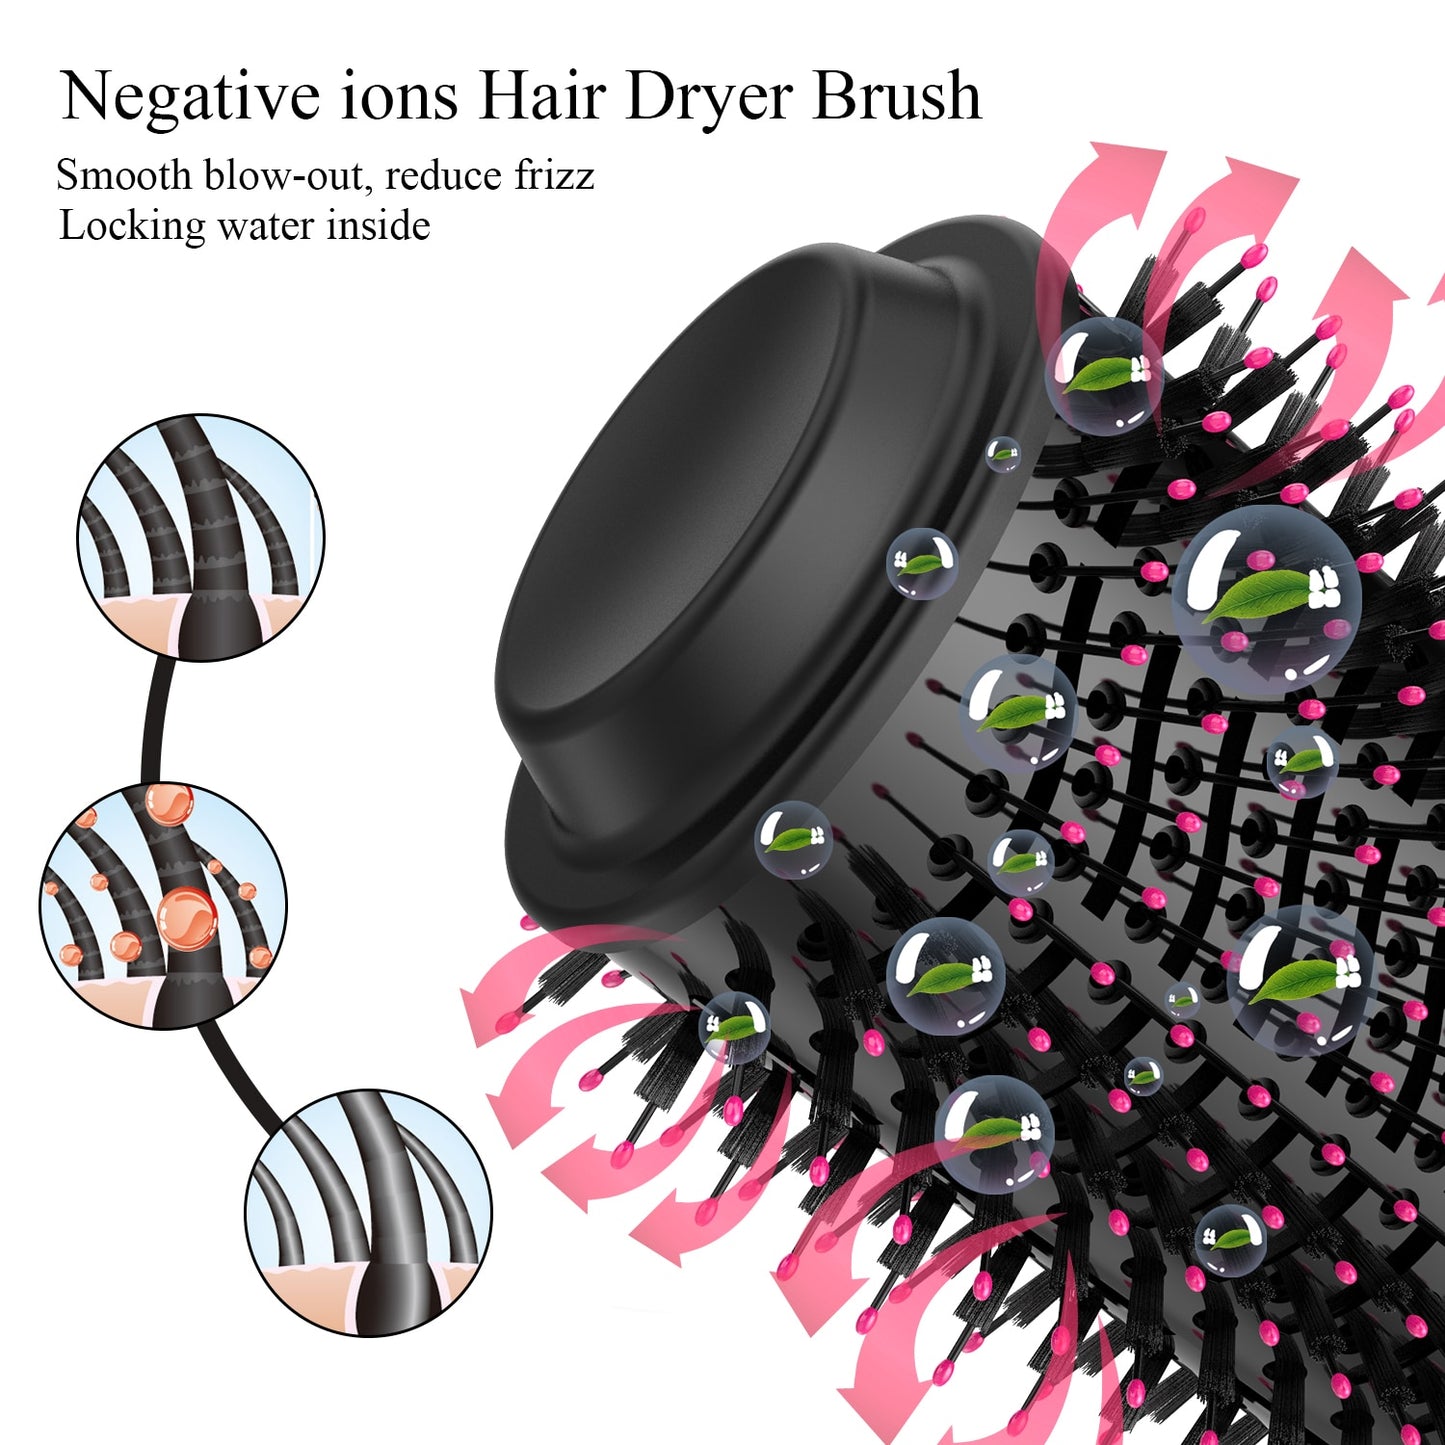 1000W Hair Dryer Hot Air Brush Styler and Volumizer Hair Straightener Curler Comb Roller One Step Electric Ion Blow Dryer Brush